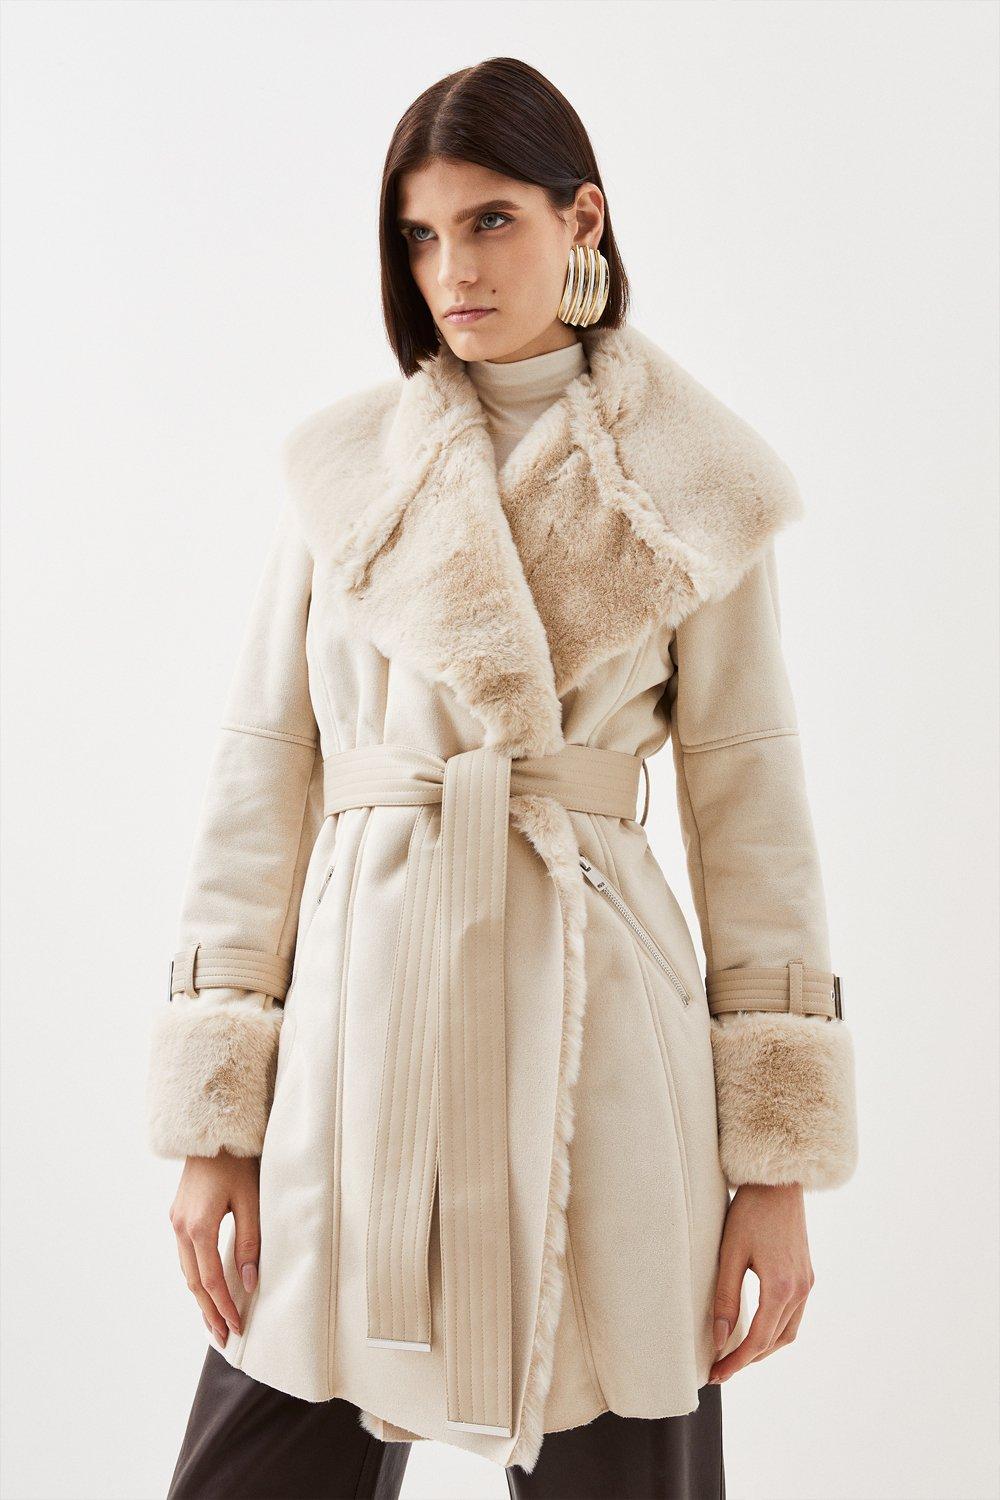 Karen Millen - Exuding easy glamour, this plush faux fur coat will be the  star of your cover-up collection. Its soft, snug texture, handy pockets and  large lapels make it a wearable